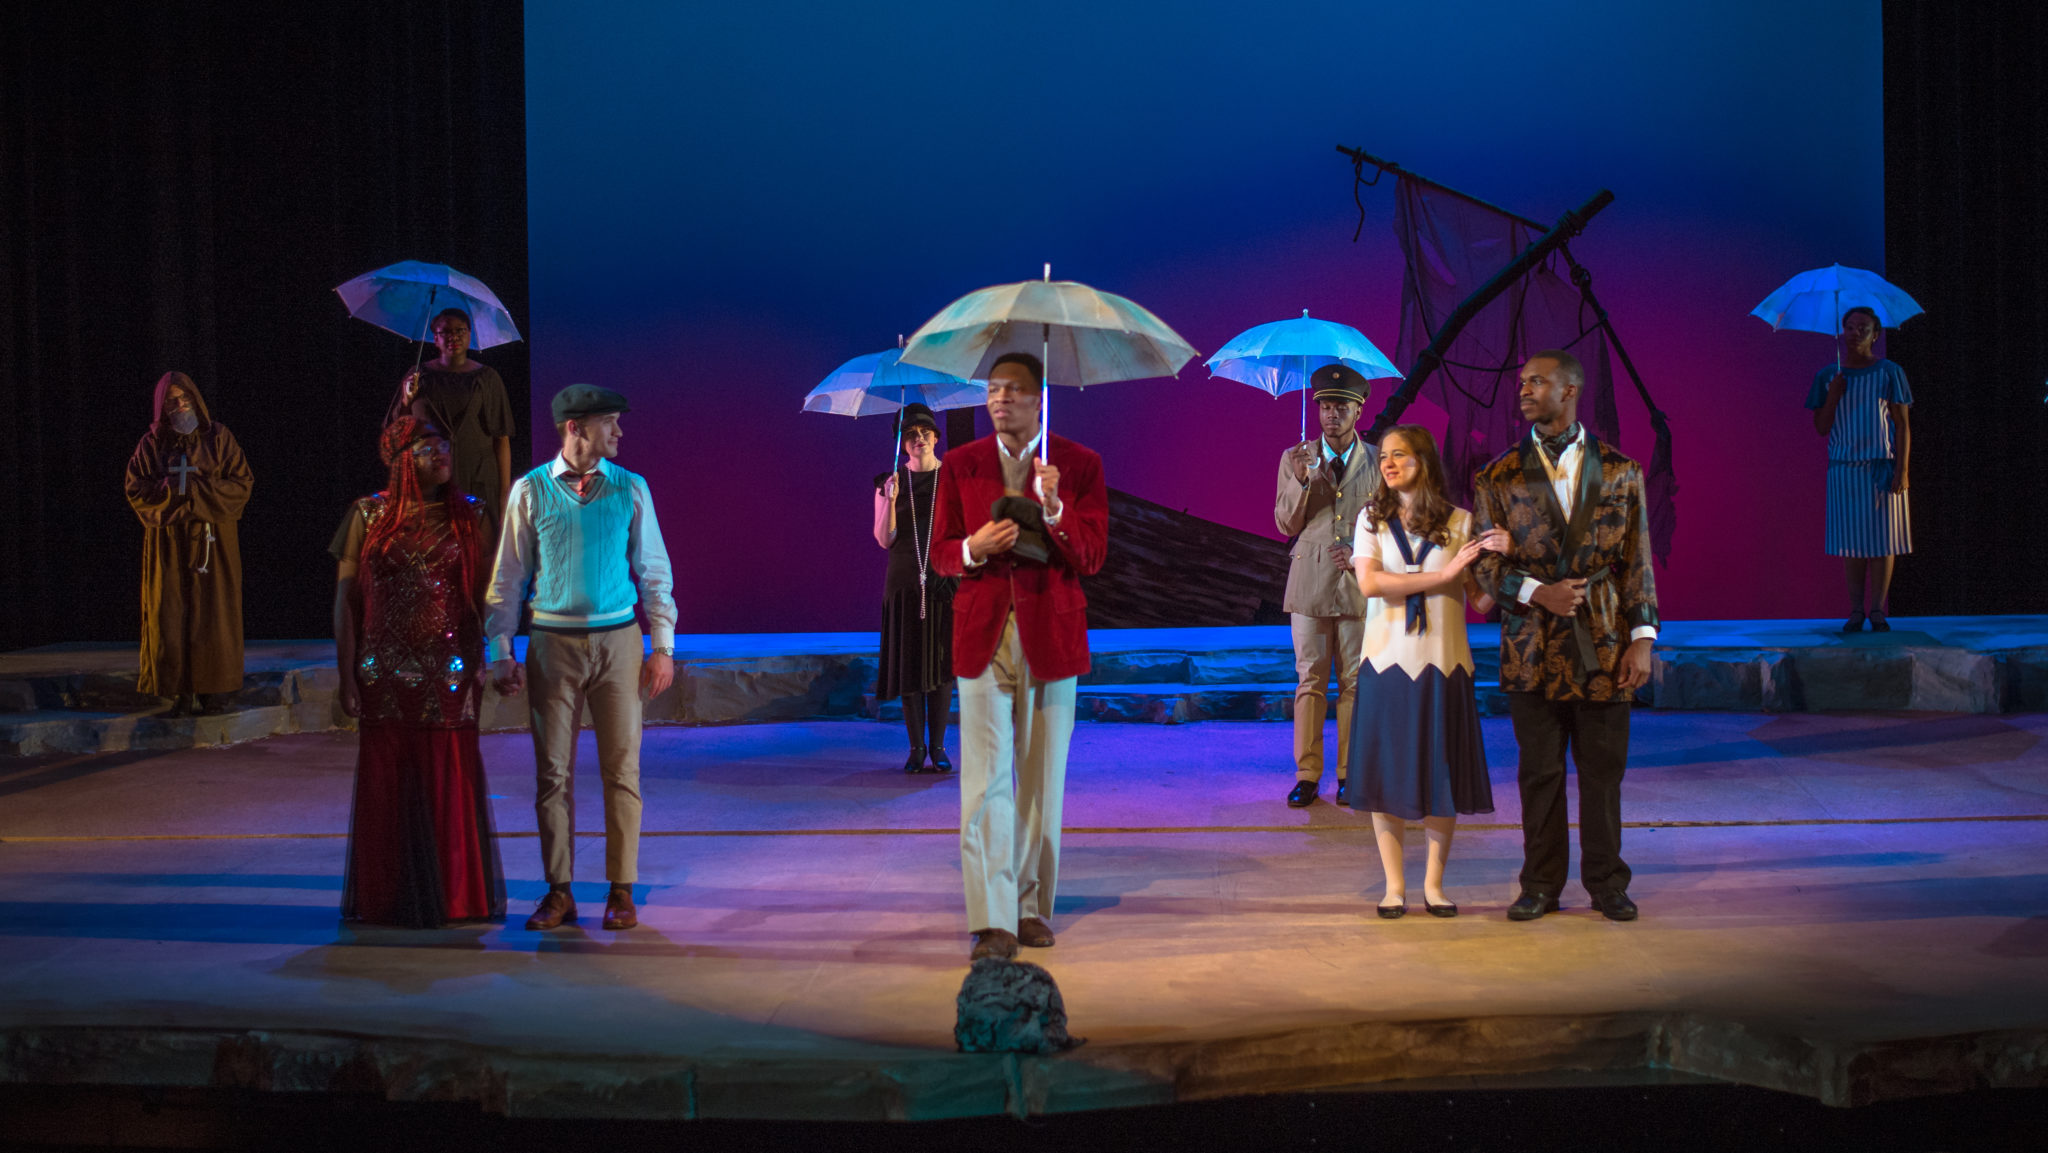 Cast of Twelfth Night on stage, some holding umbrellas